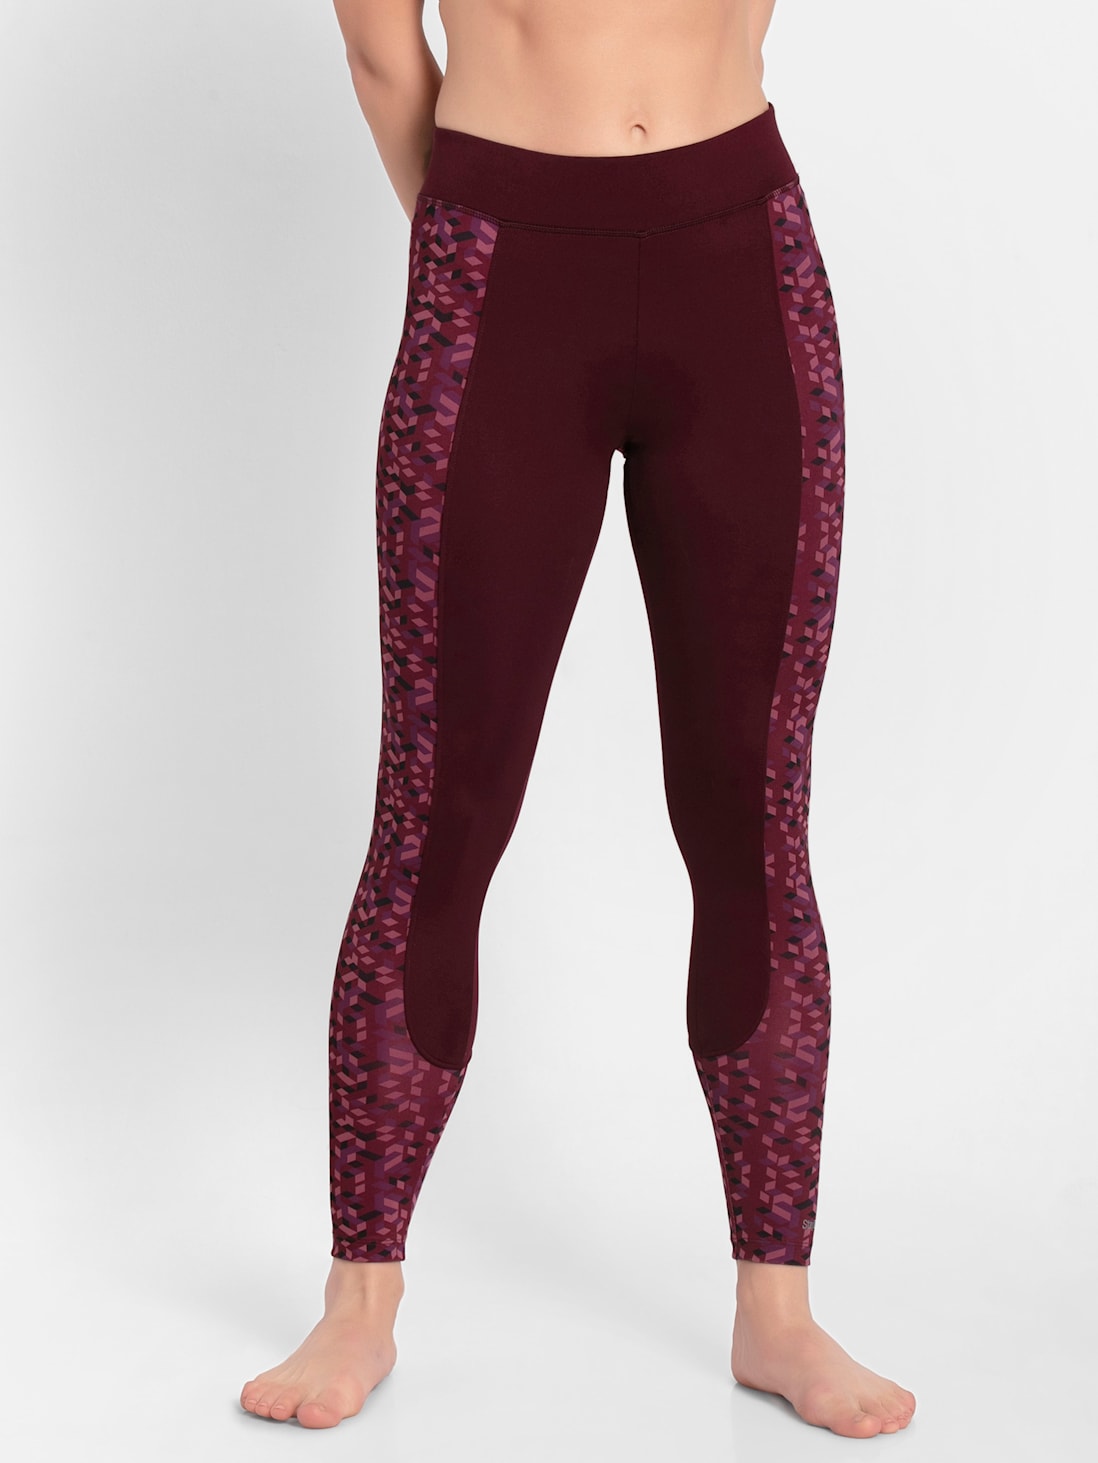 Buy Women's Microfiber Elastane Stretch Panel Printed Performance Leggings  with Coin Pocket and Stay Dry Technology - Wine Tasting MW21